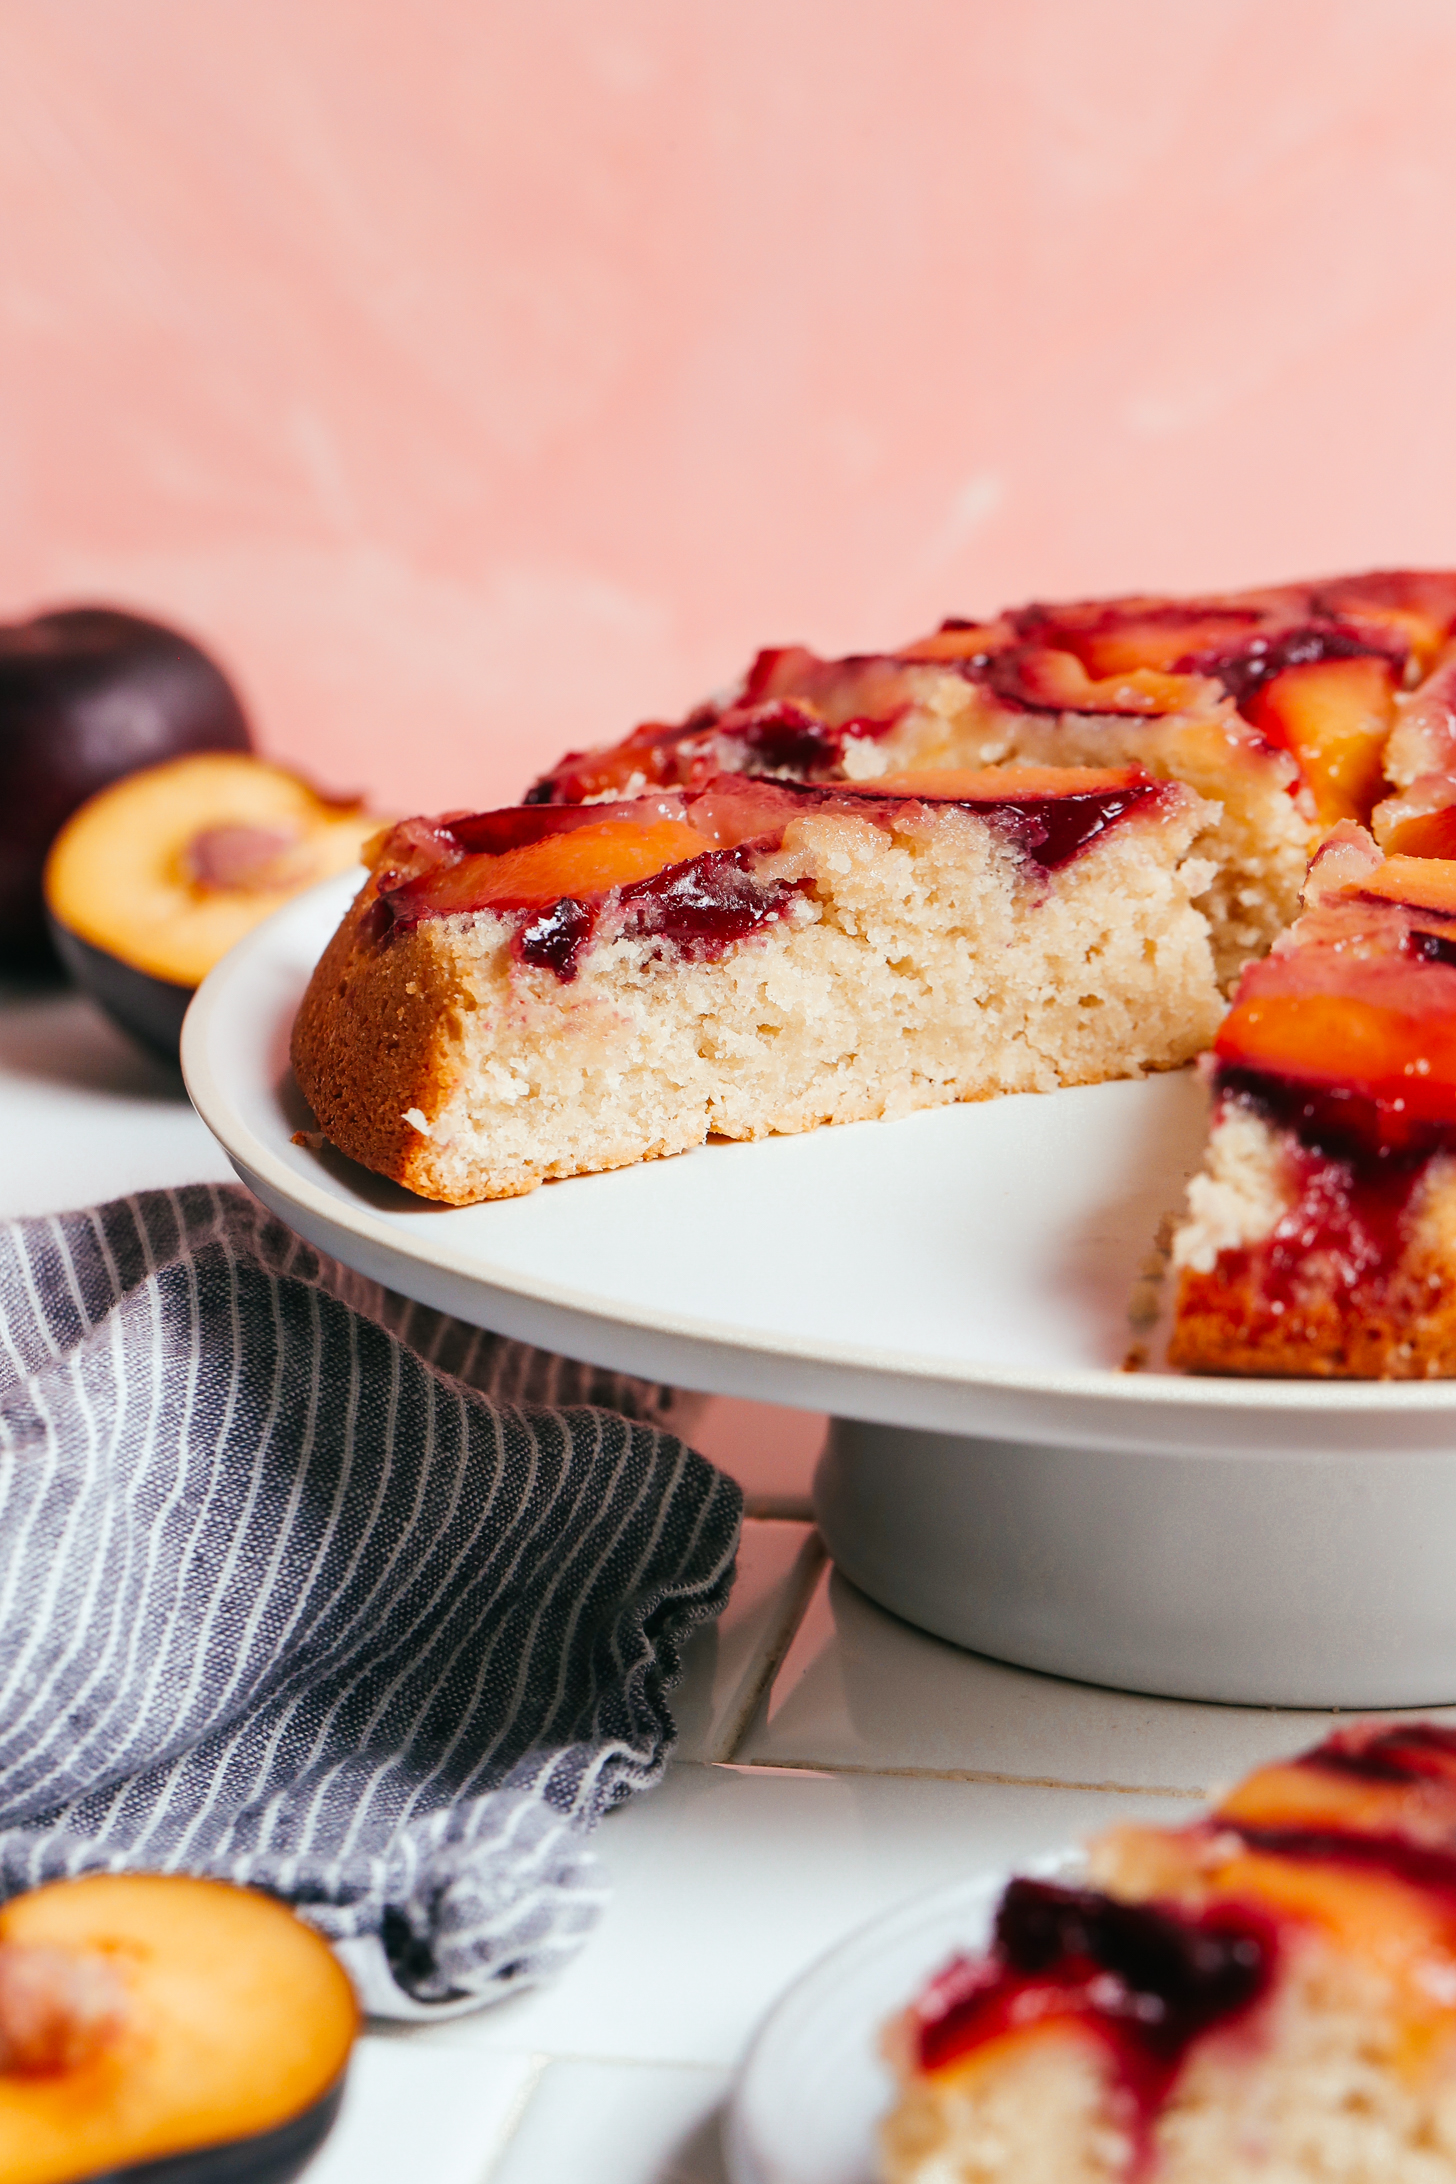 Side view of a partially sliced plum upside down cake on a platter